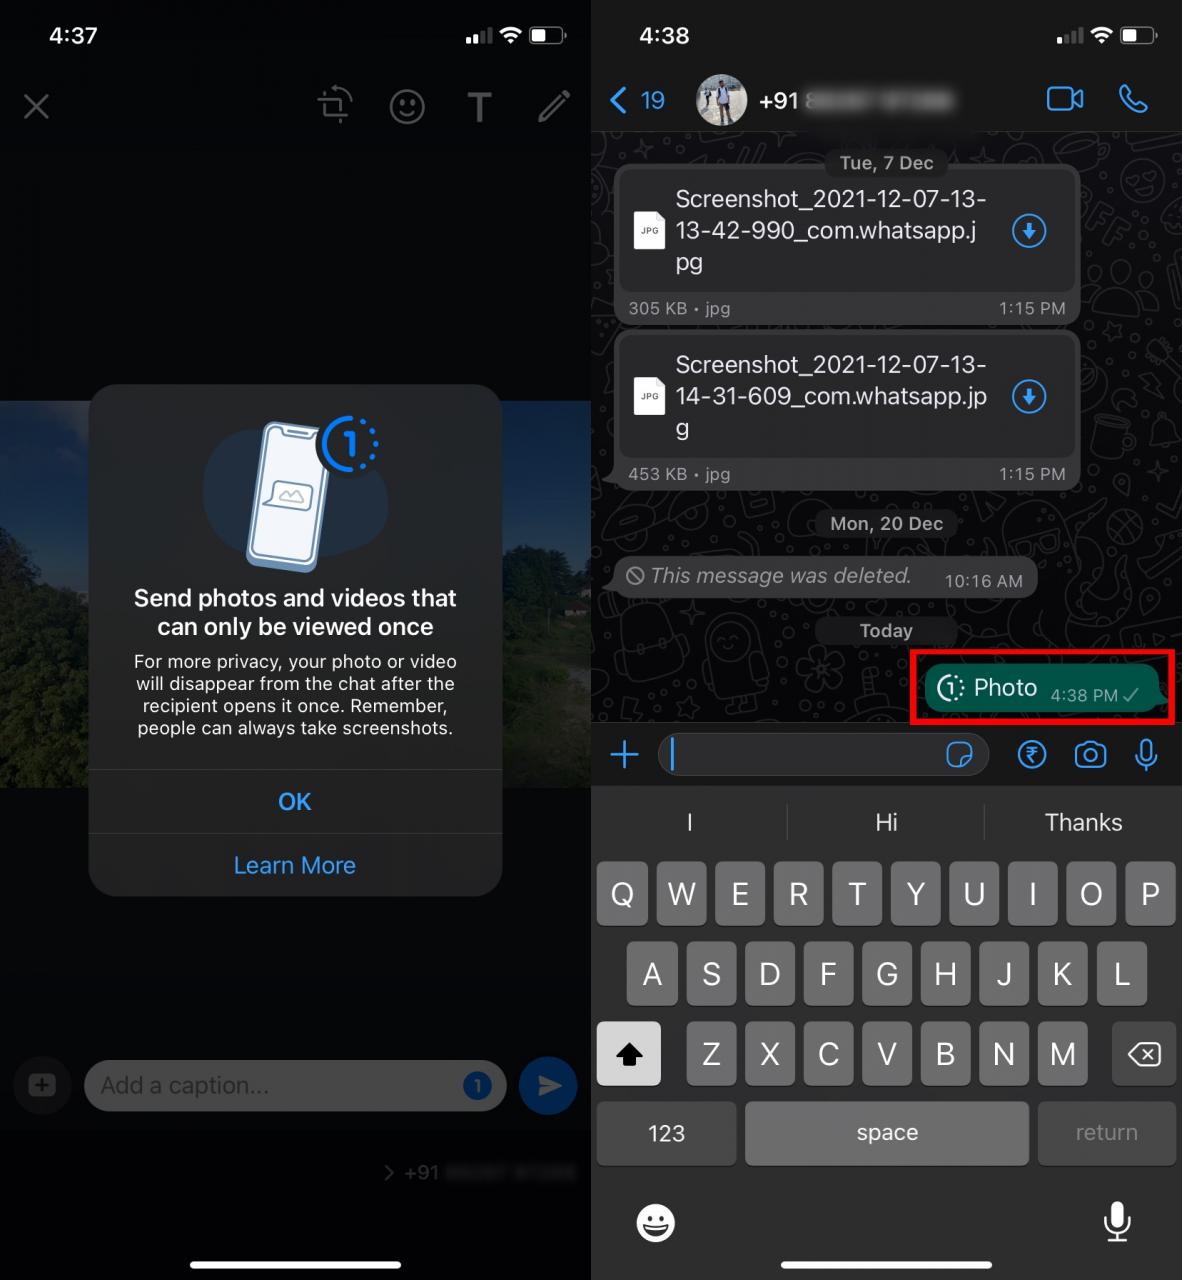 How To Send View Once Photos And Videos On Whatsapp